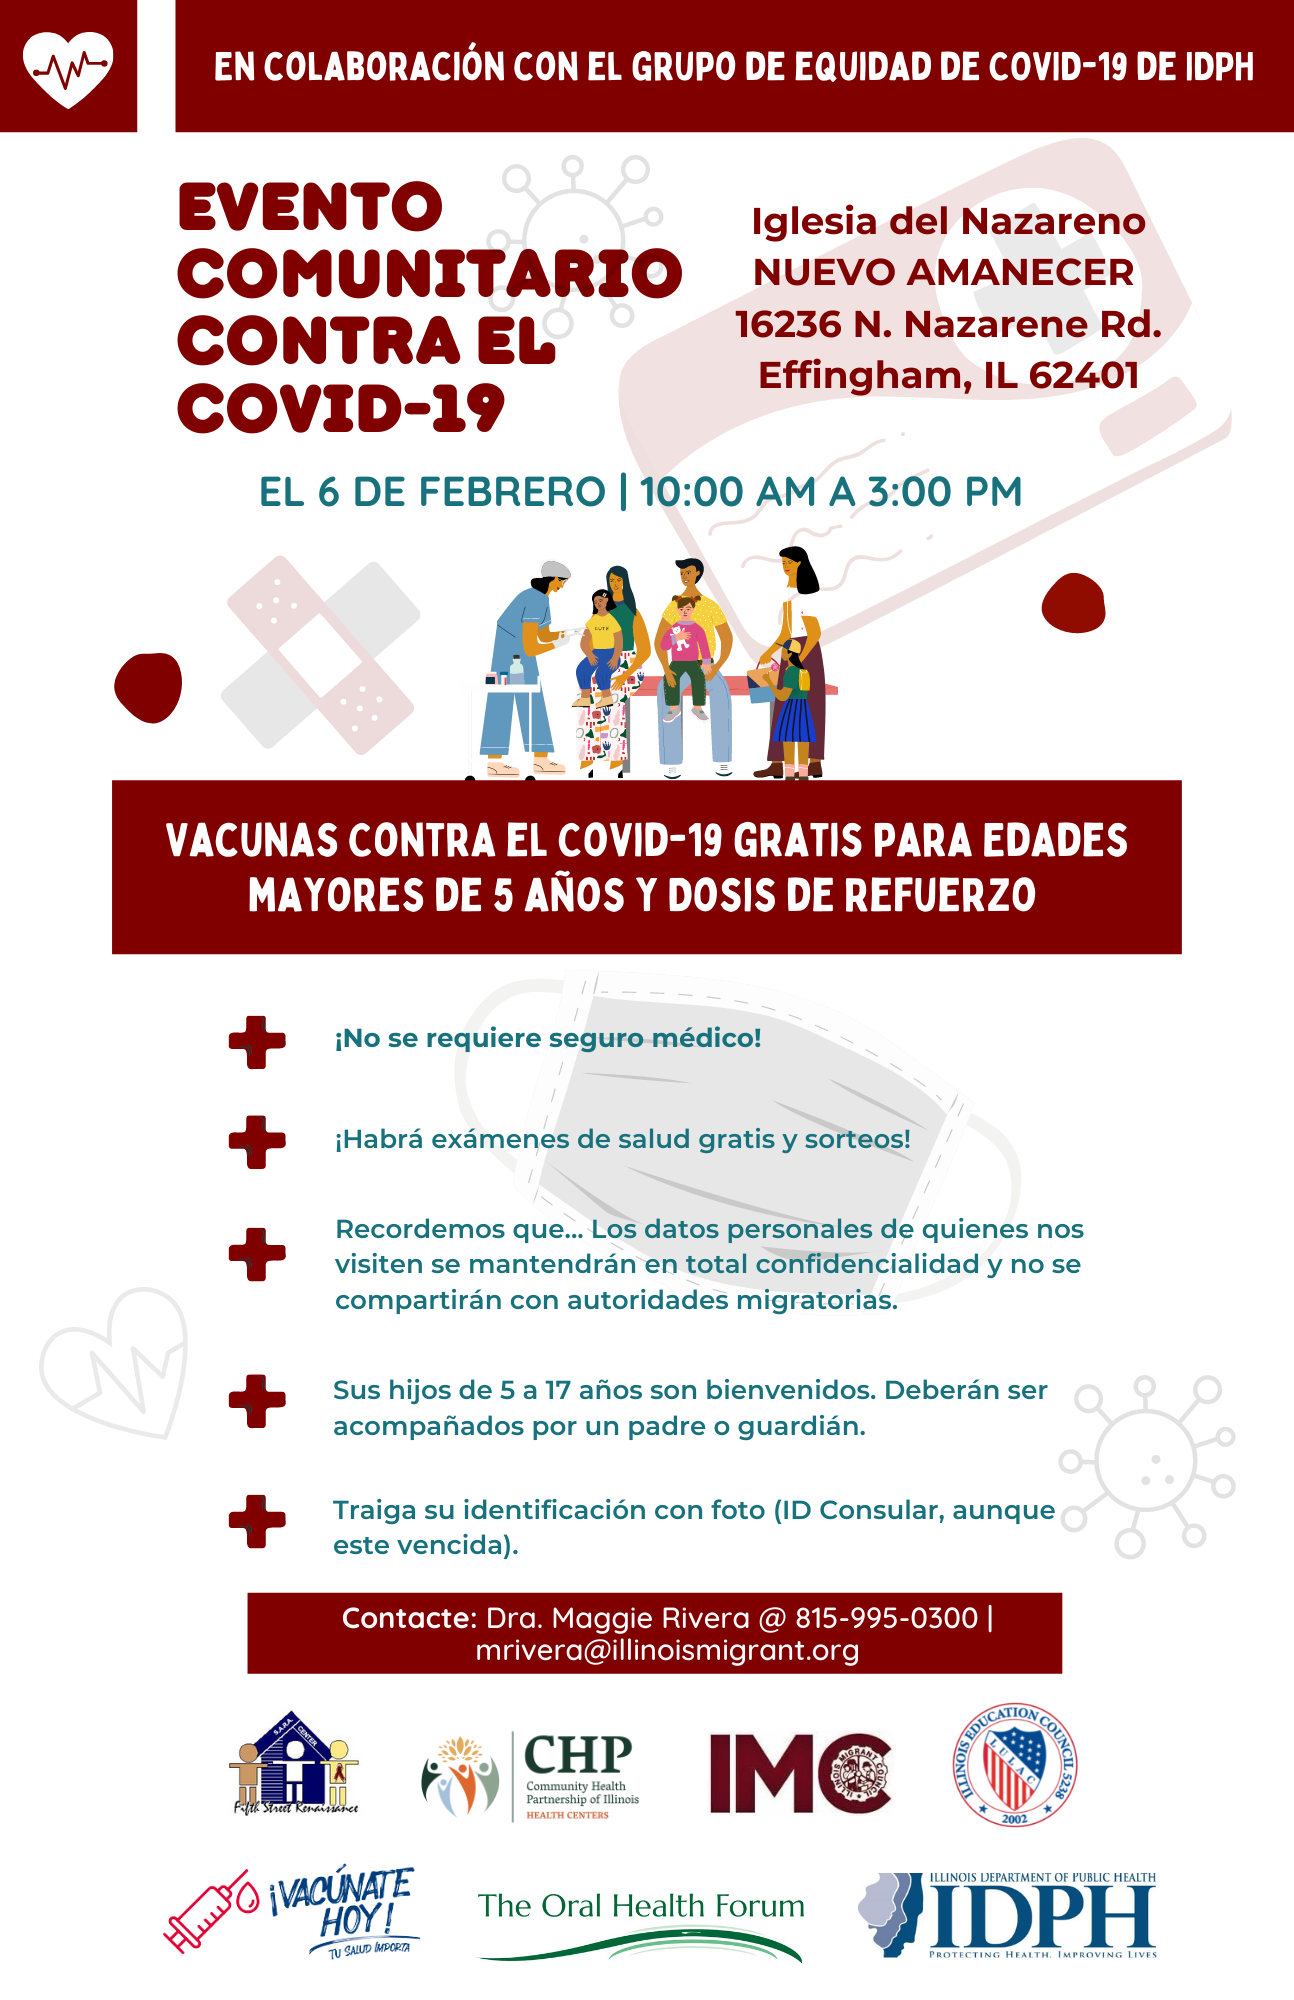 COVID-19 vaccine community event flyer in Spanish